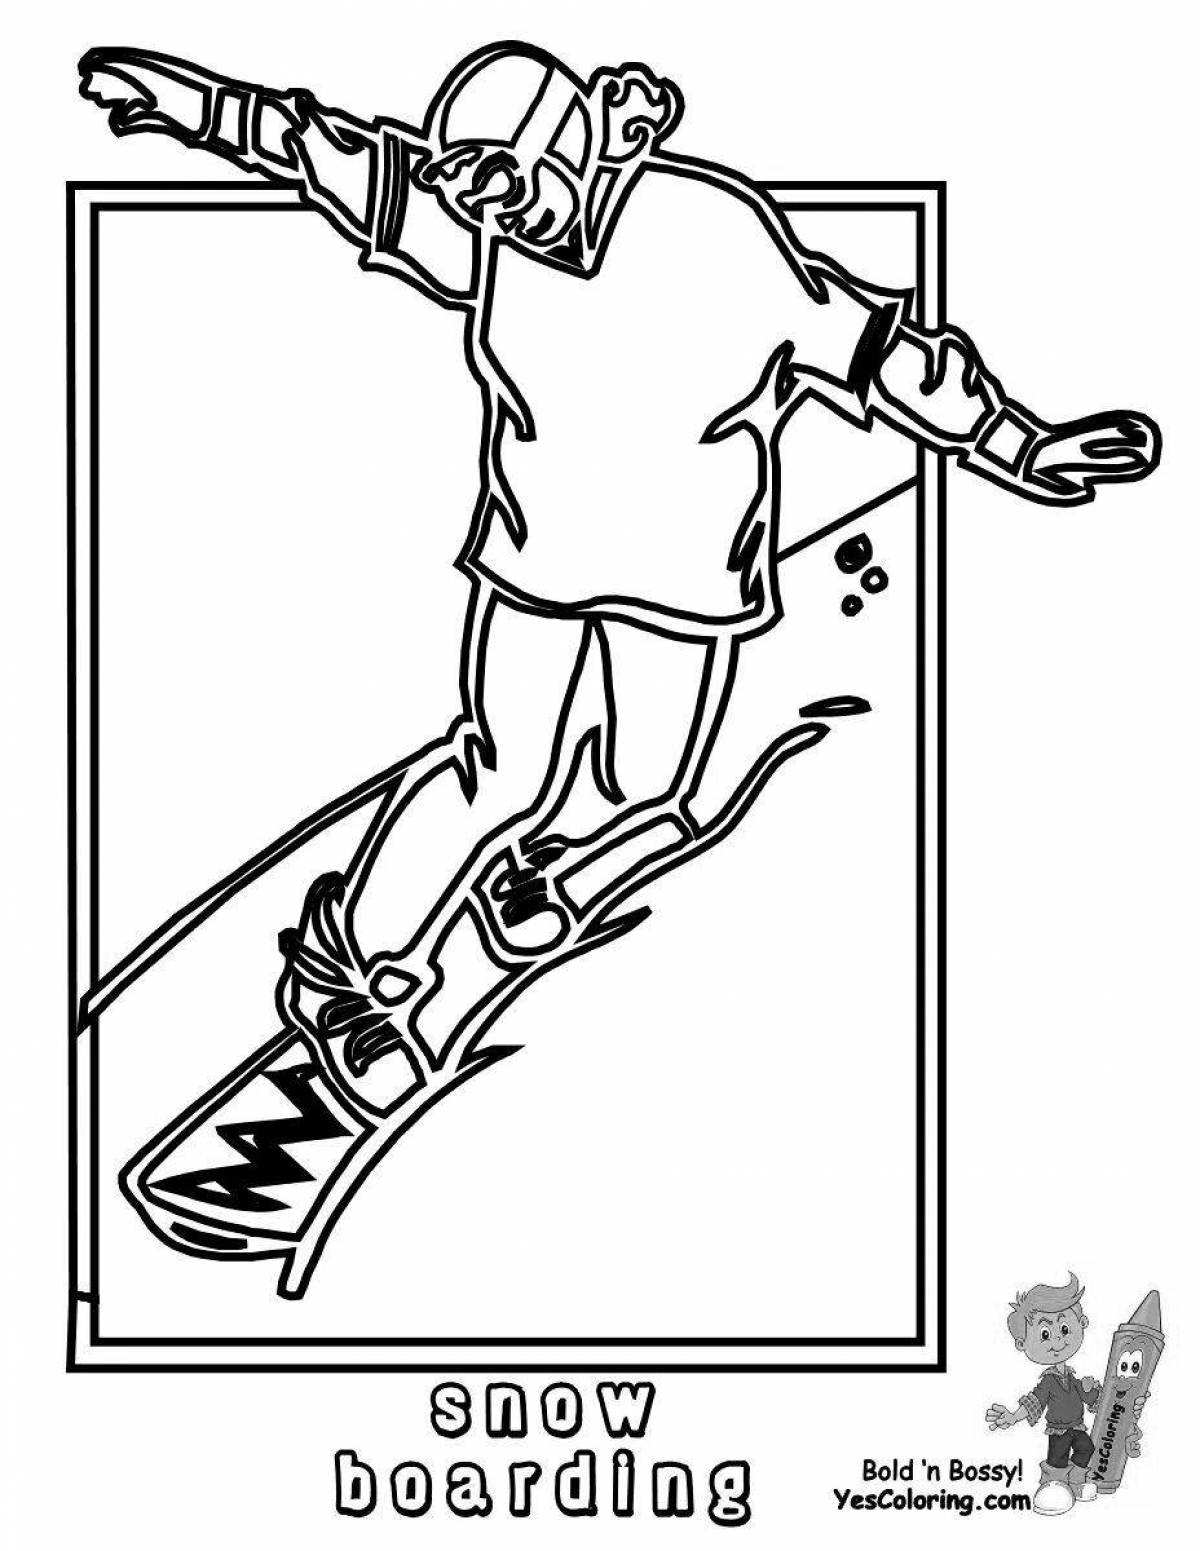 Snowboard bright coloring book for kids